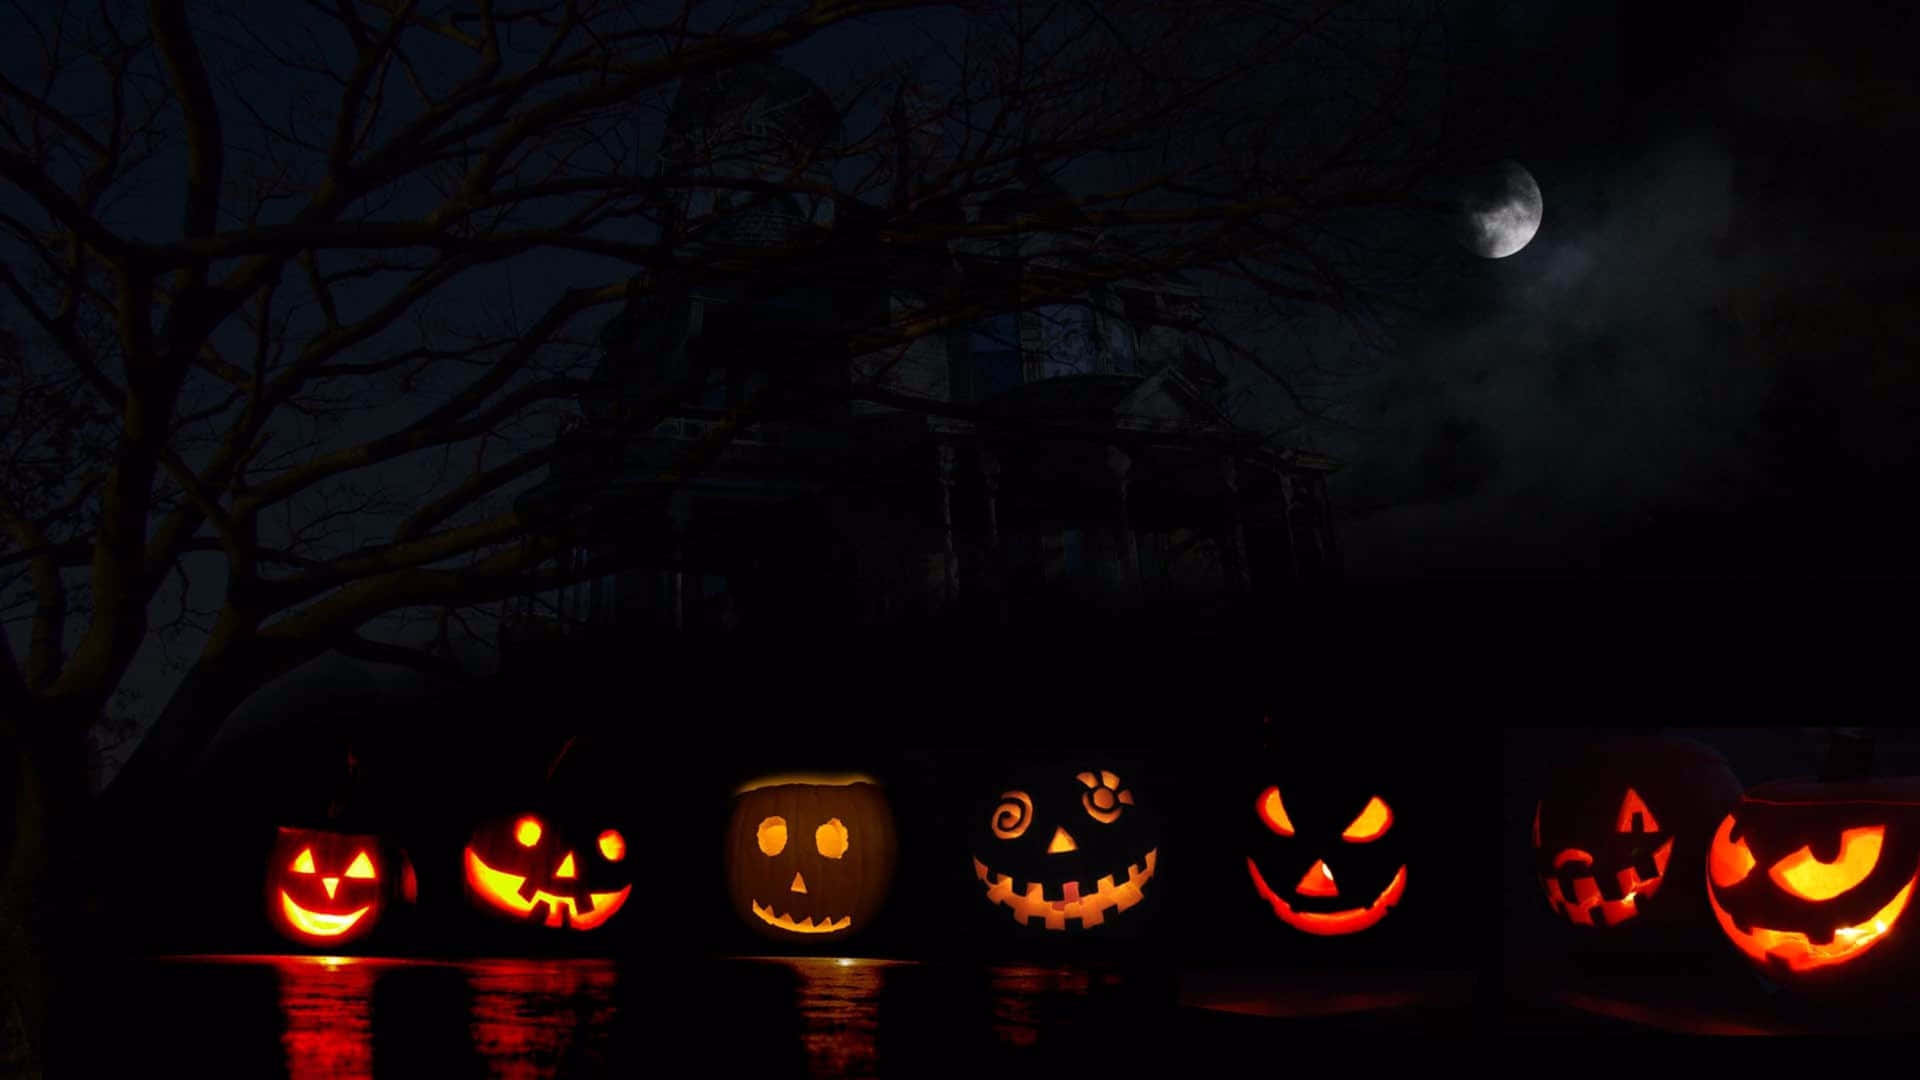 A Group Of Pumpkins With Faces Lit Up Wallpaper